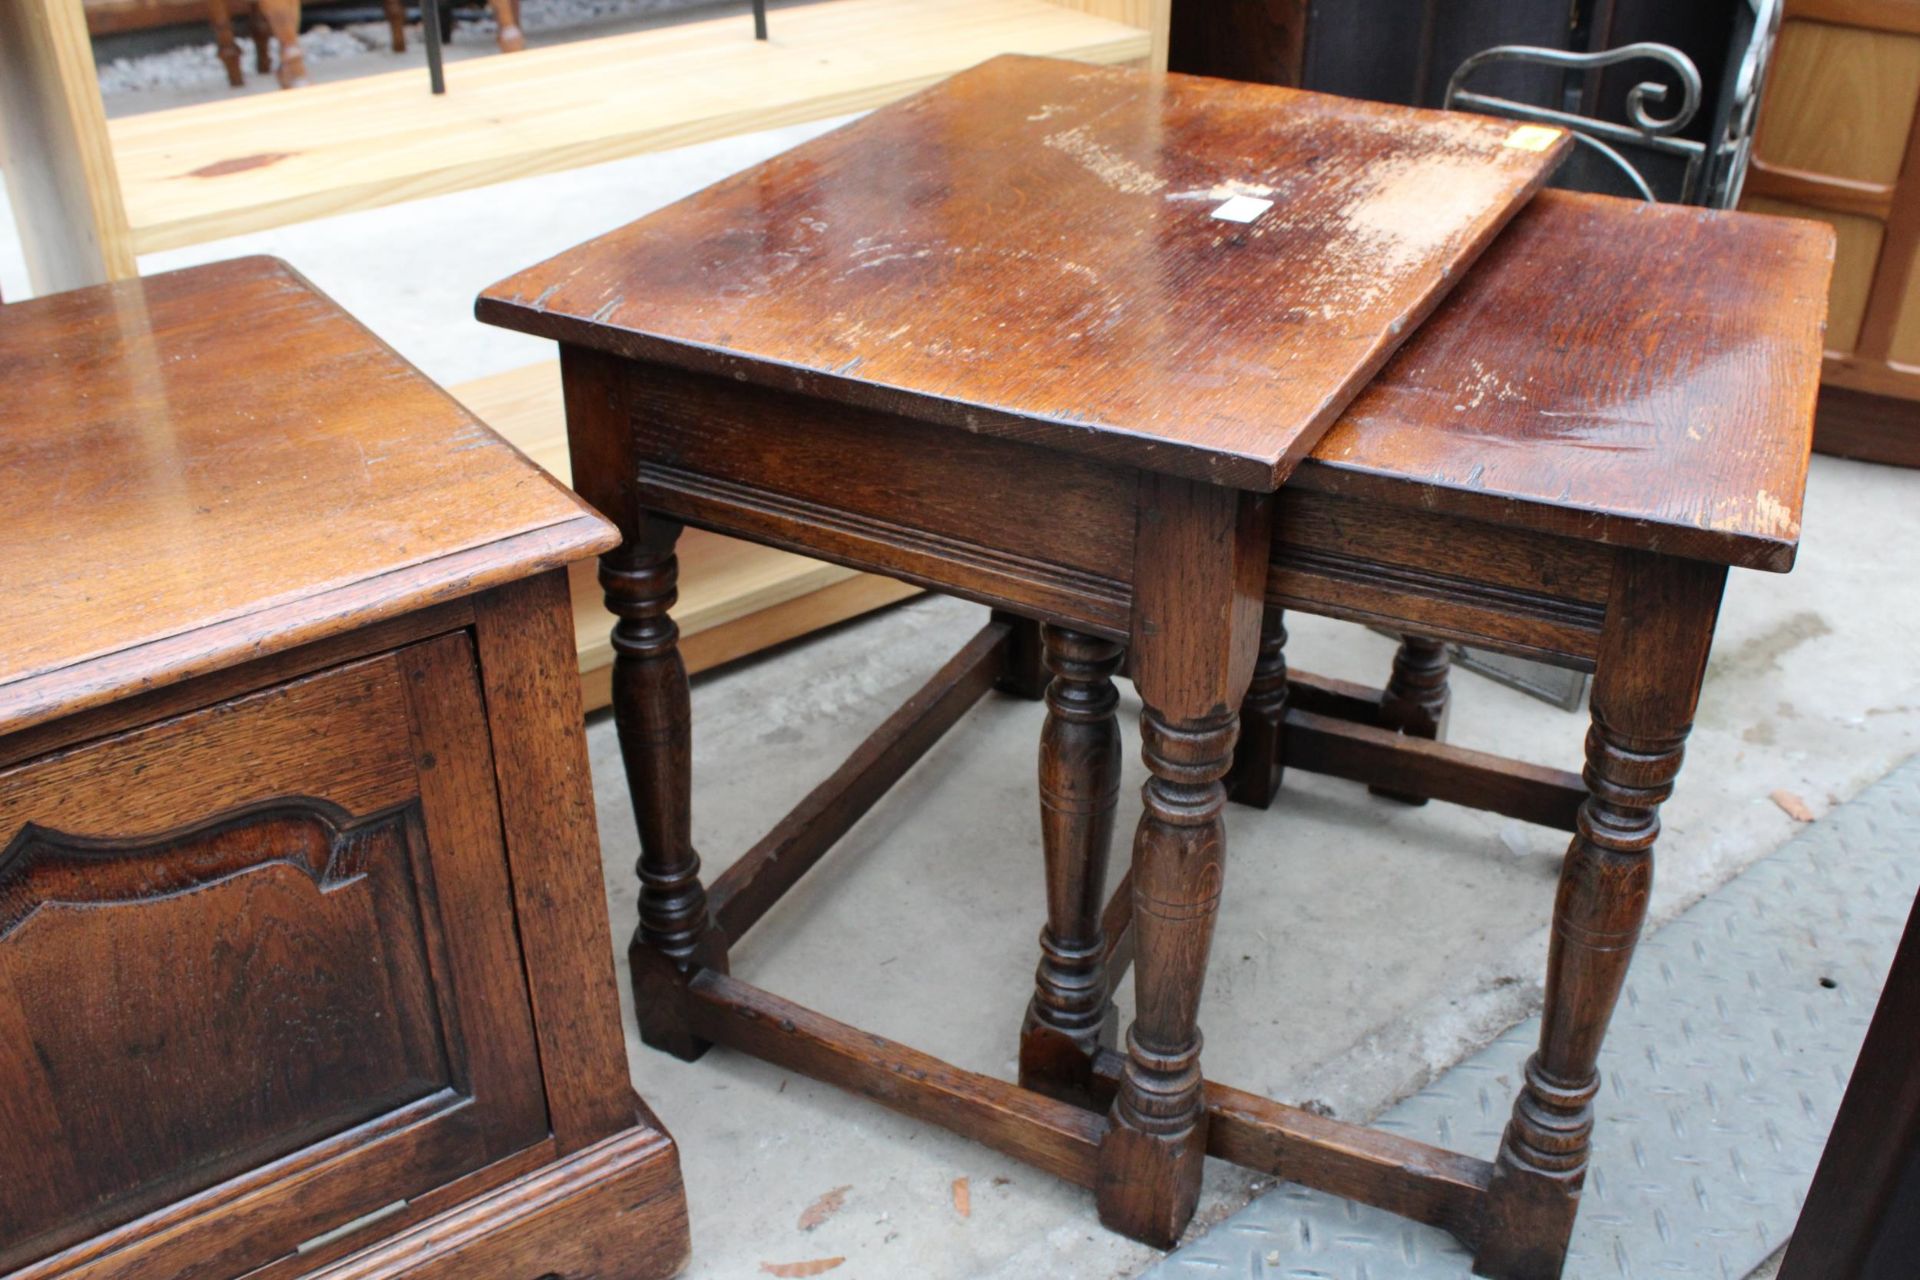 A MODERN OAK NEST OF TWO TABLES AND AN OAK ANTIQUE STYLE CABINET - Image 4 of 4